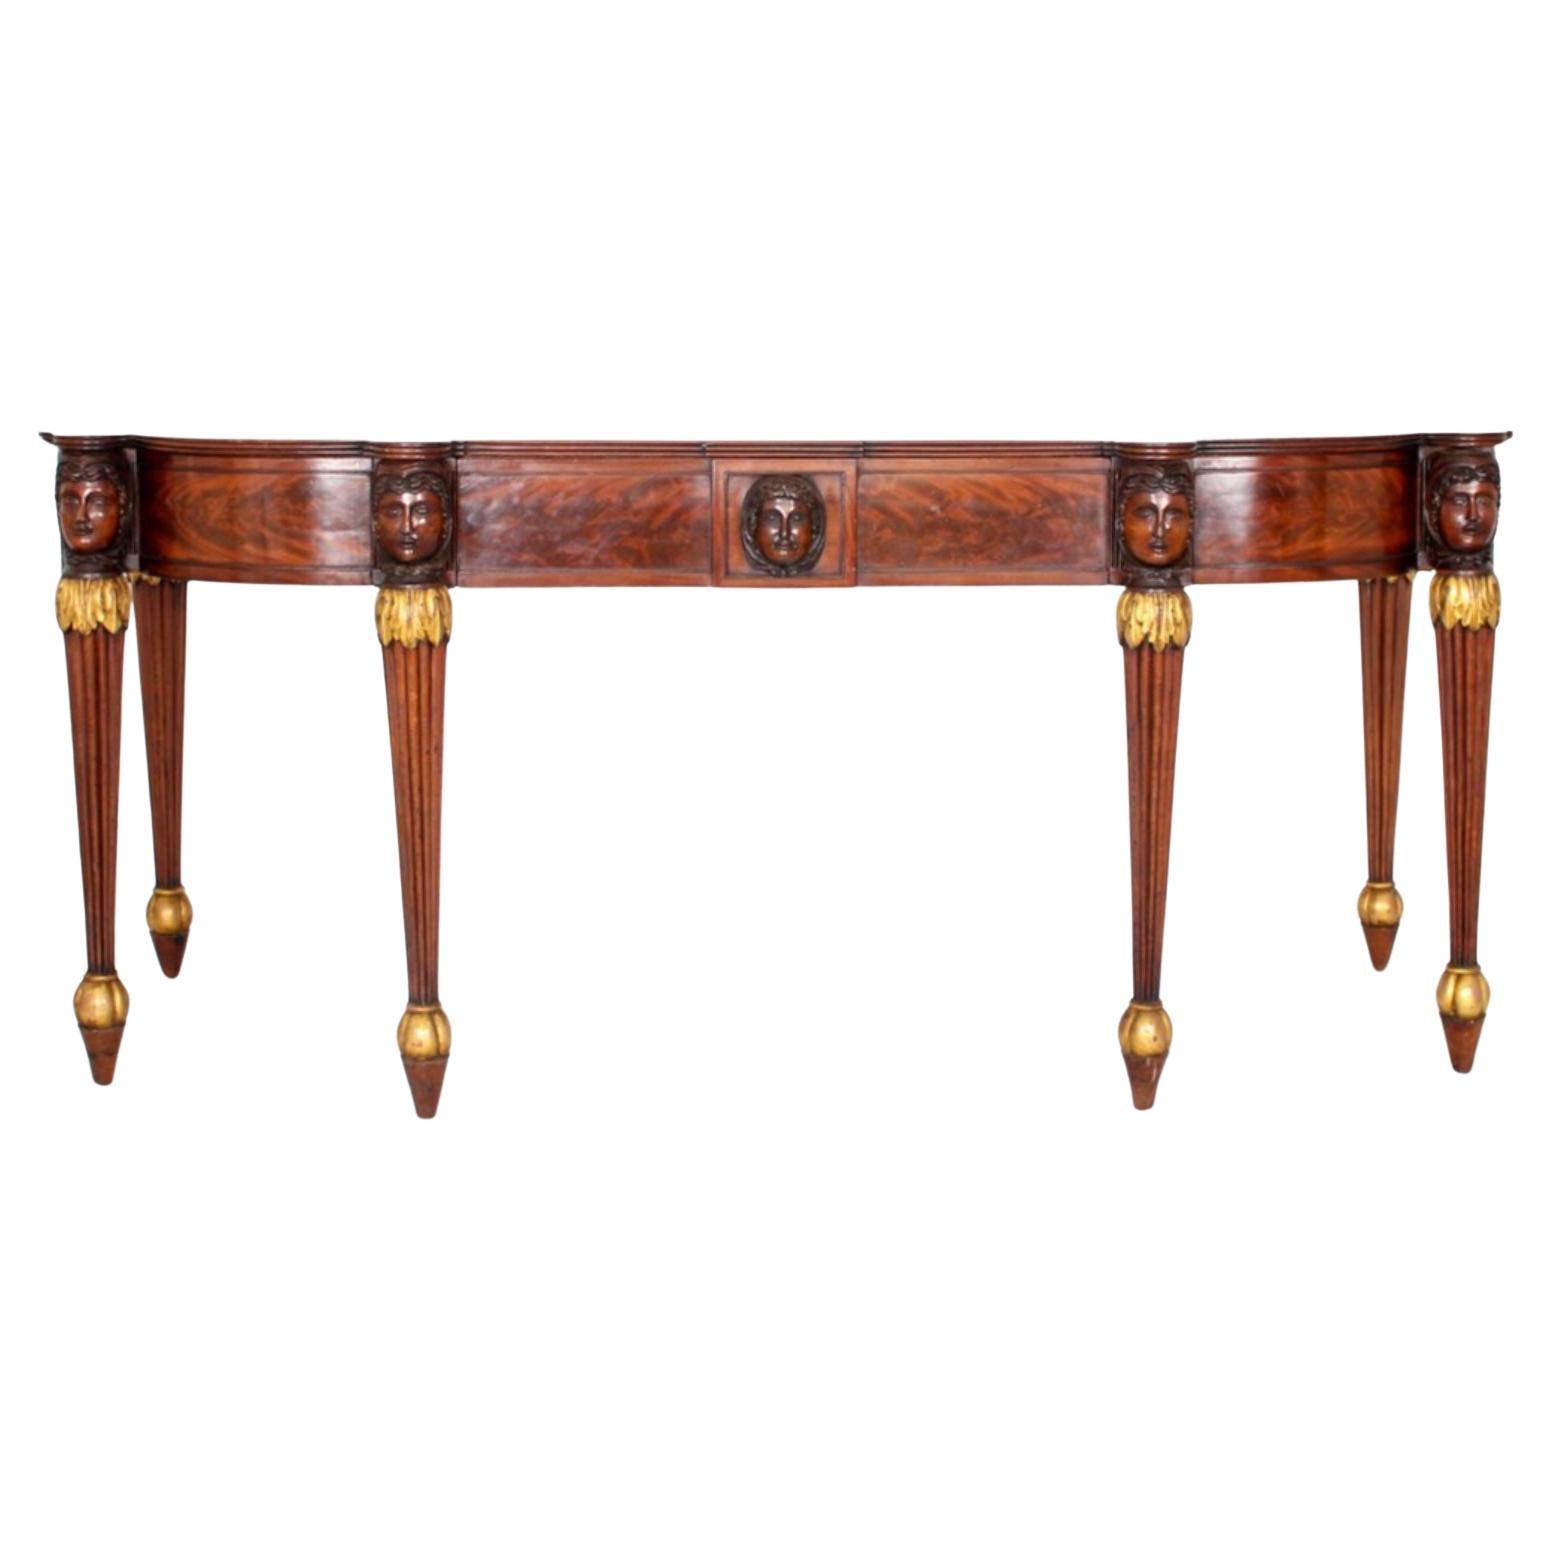 A Pair of Regency Mahogany and Parcel Gilt Serving Tables